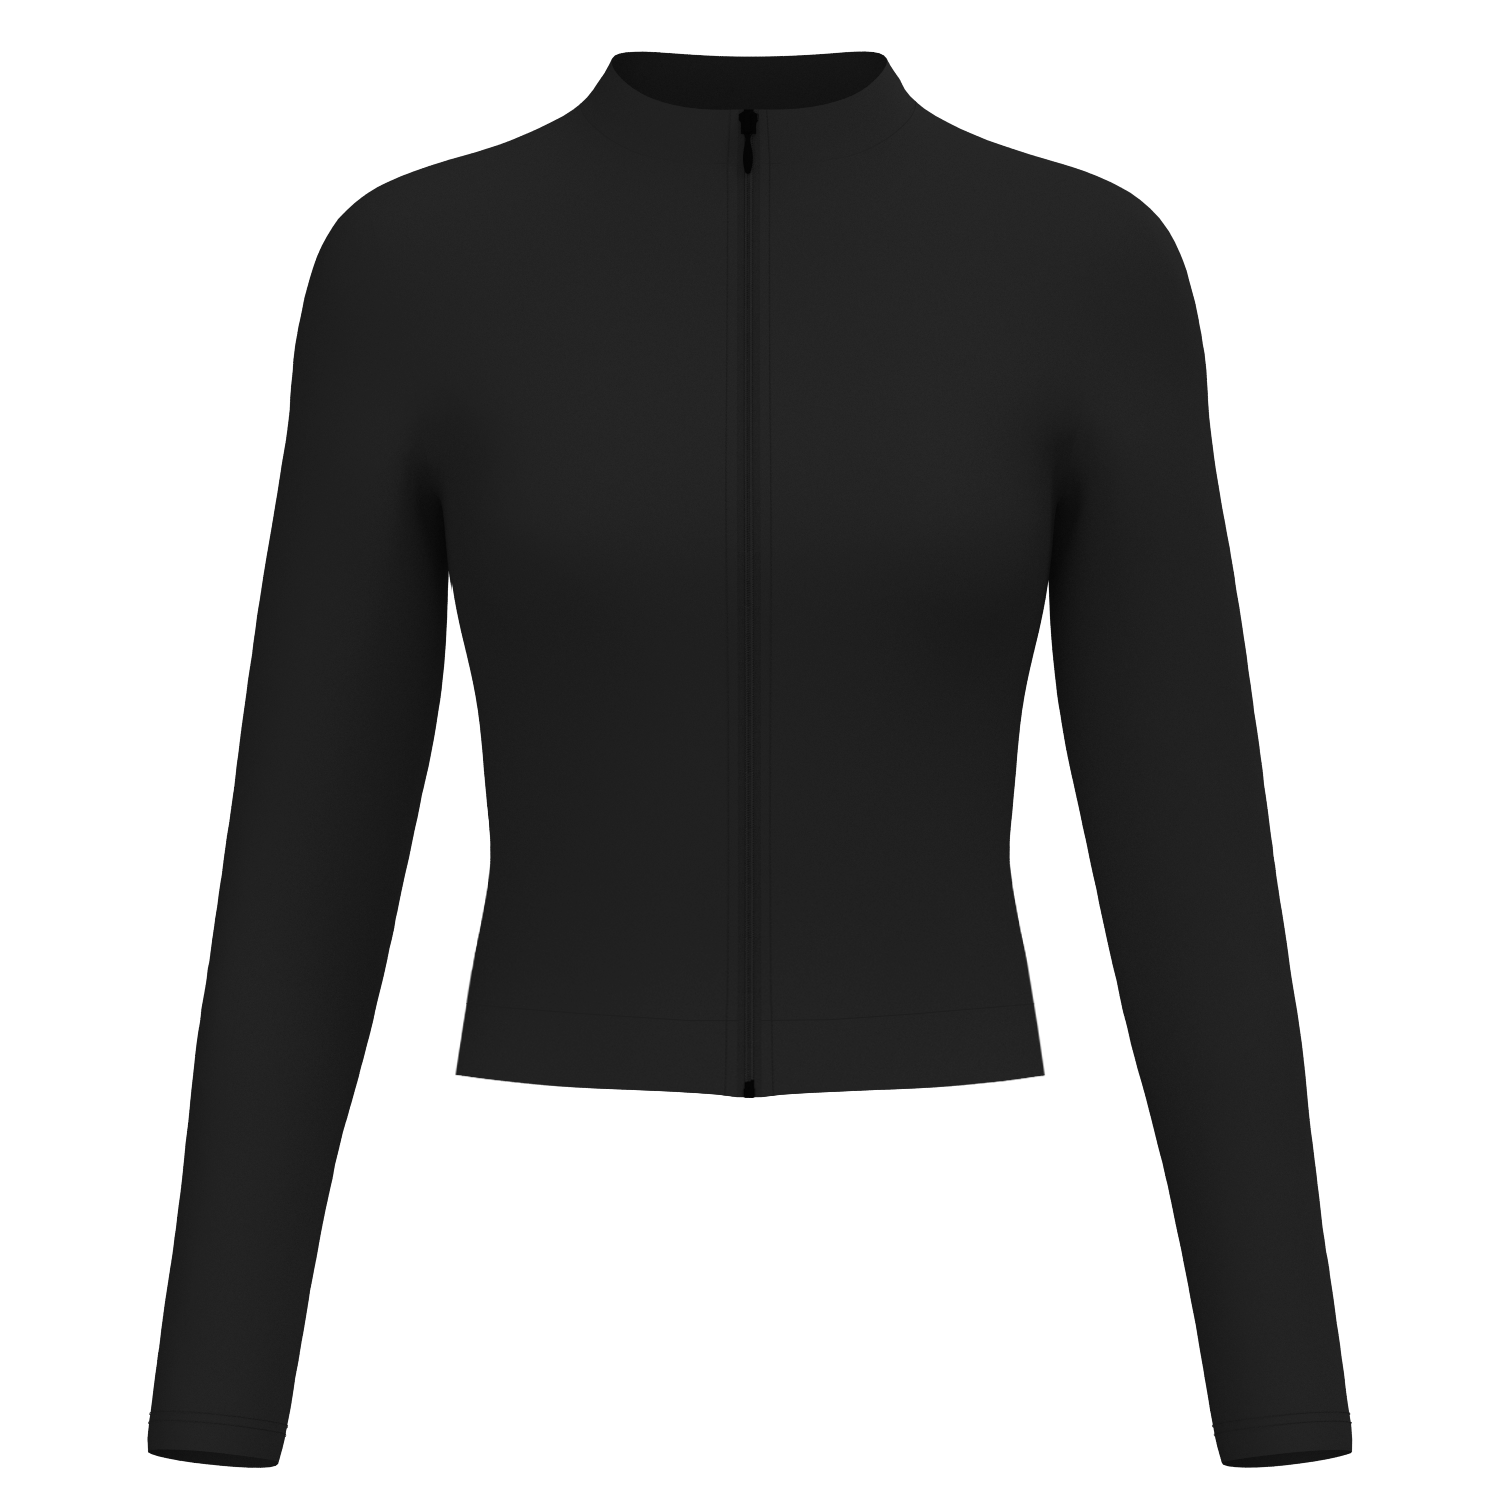 CLASSIC FIT ZIP UP - ONYX